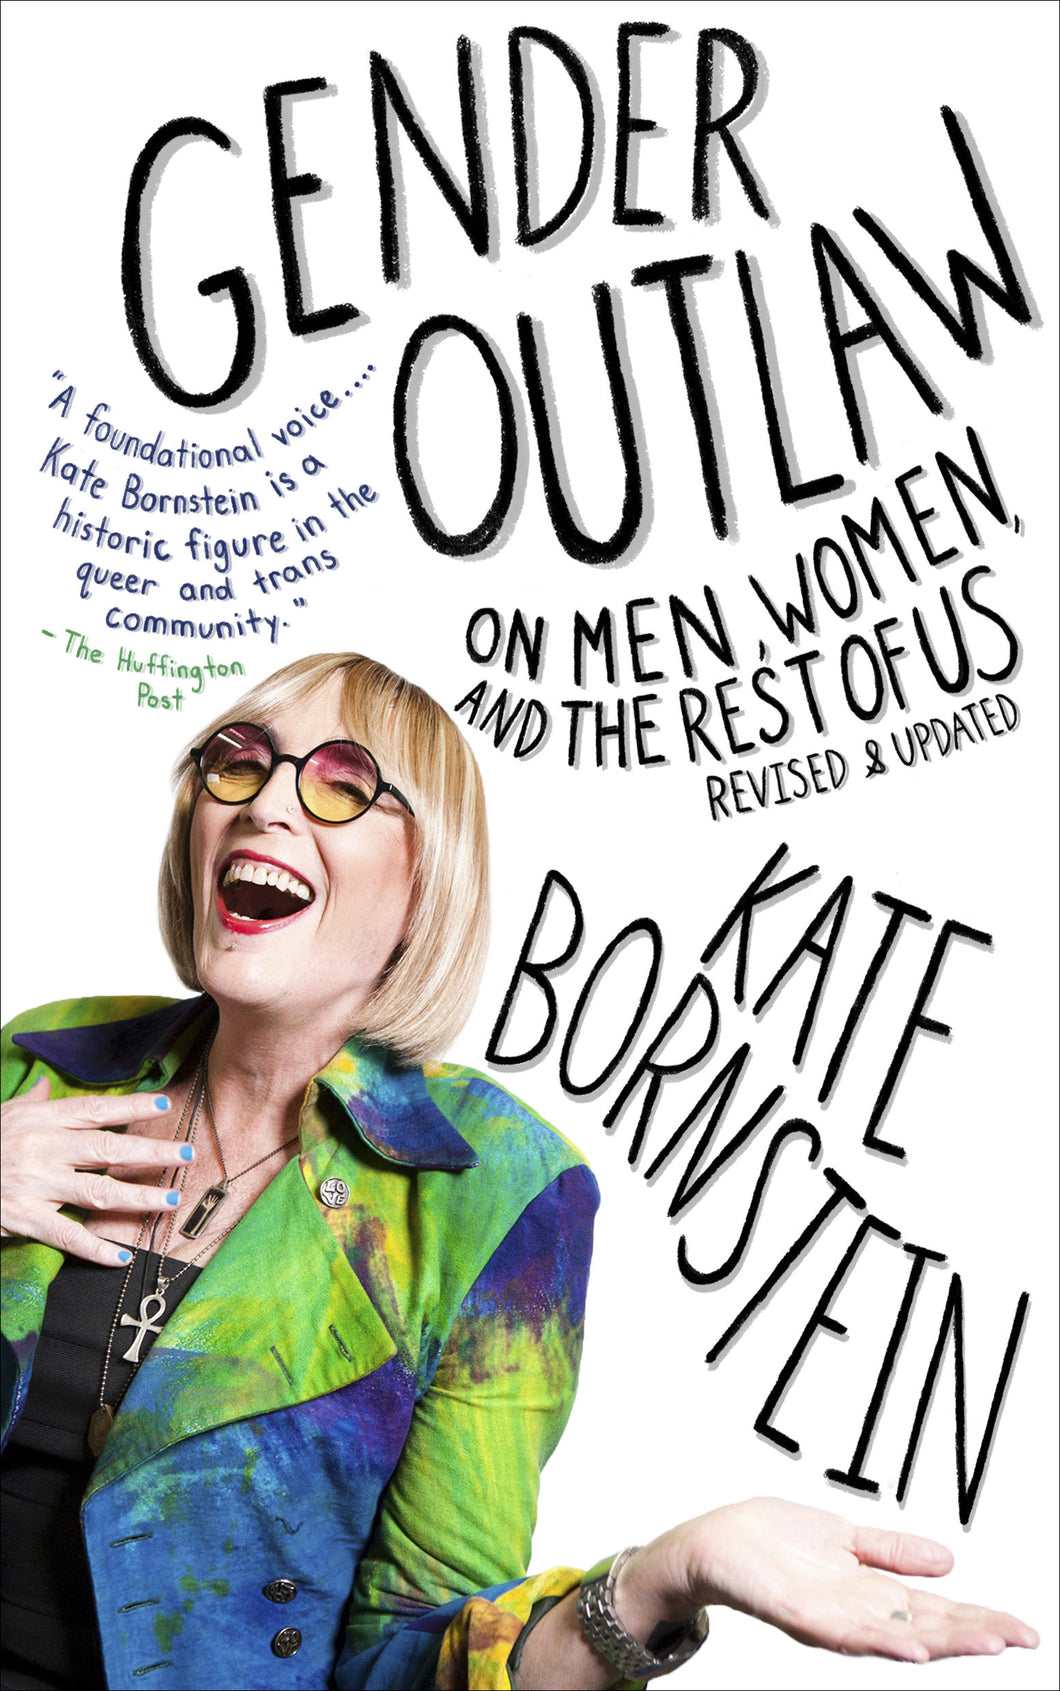 Gender Outlaw: On Men, Women, and the Rest, Revised Edition of Us by Kate Bornstein